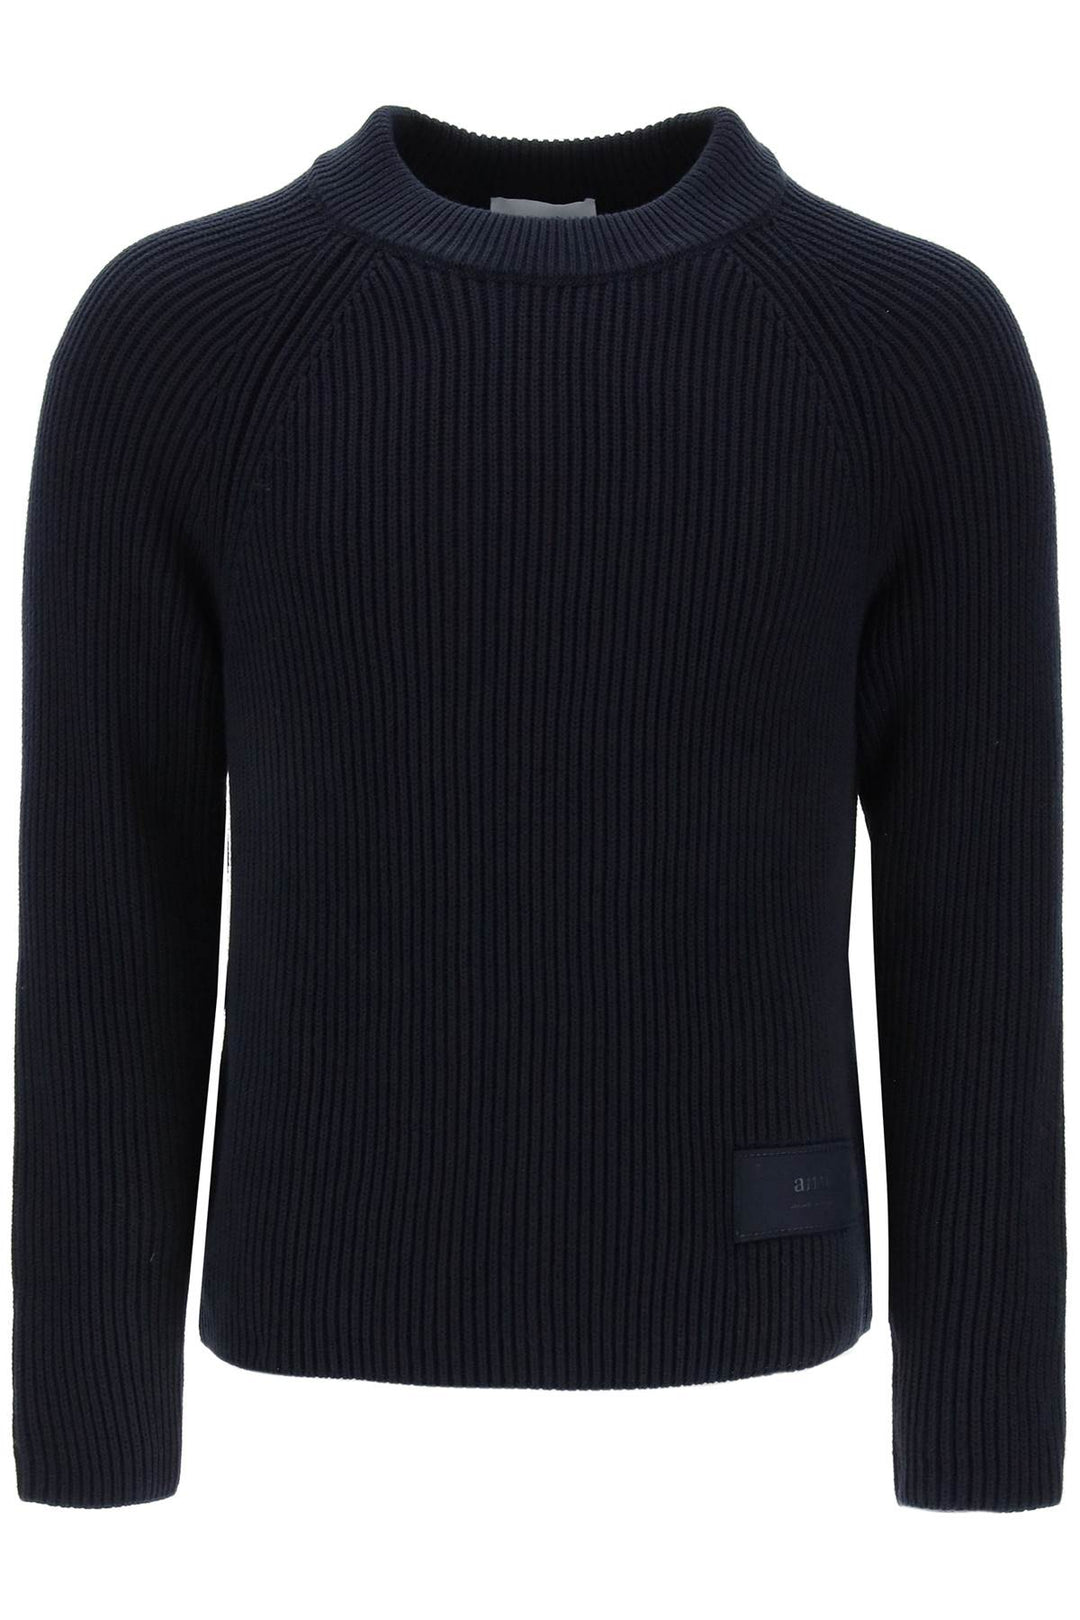 Ami paris cotton and wool crew-neck sweater-0